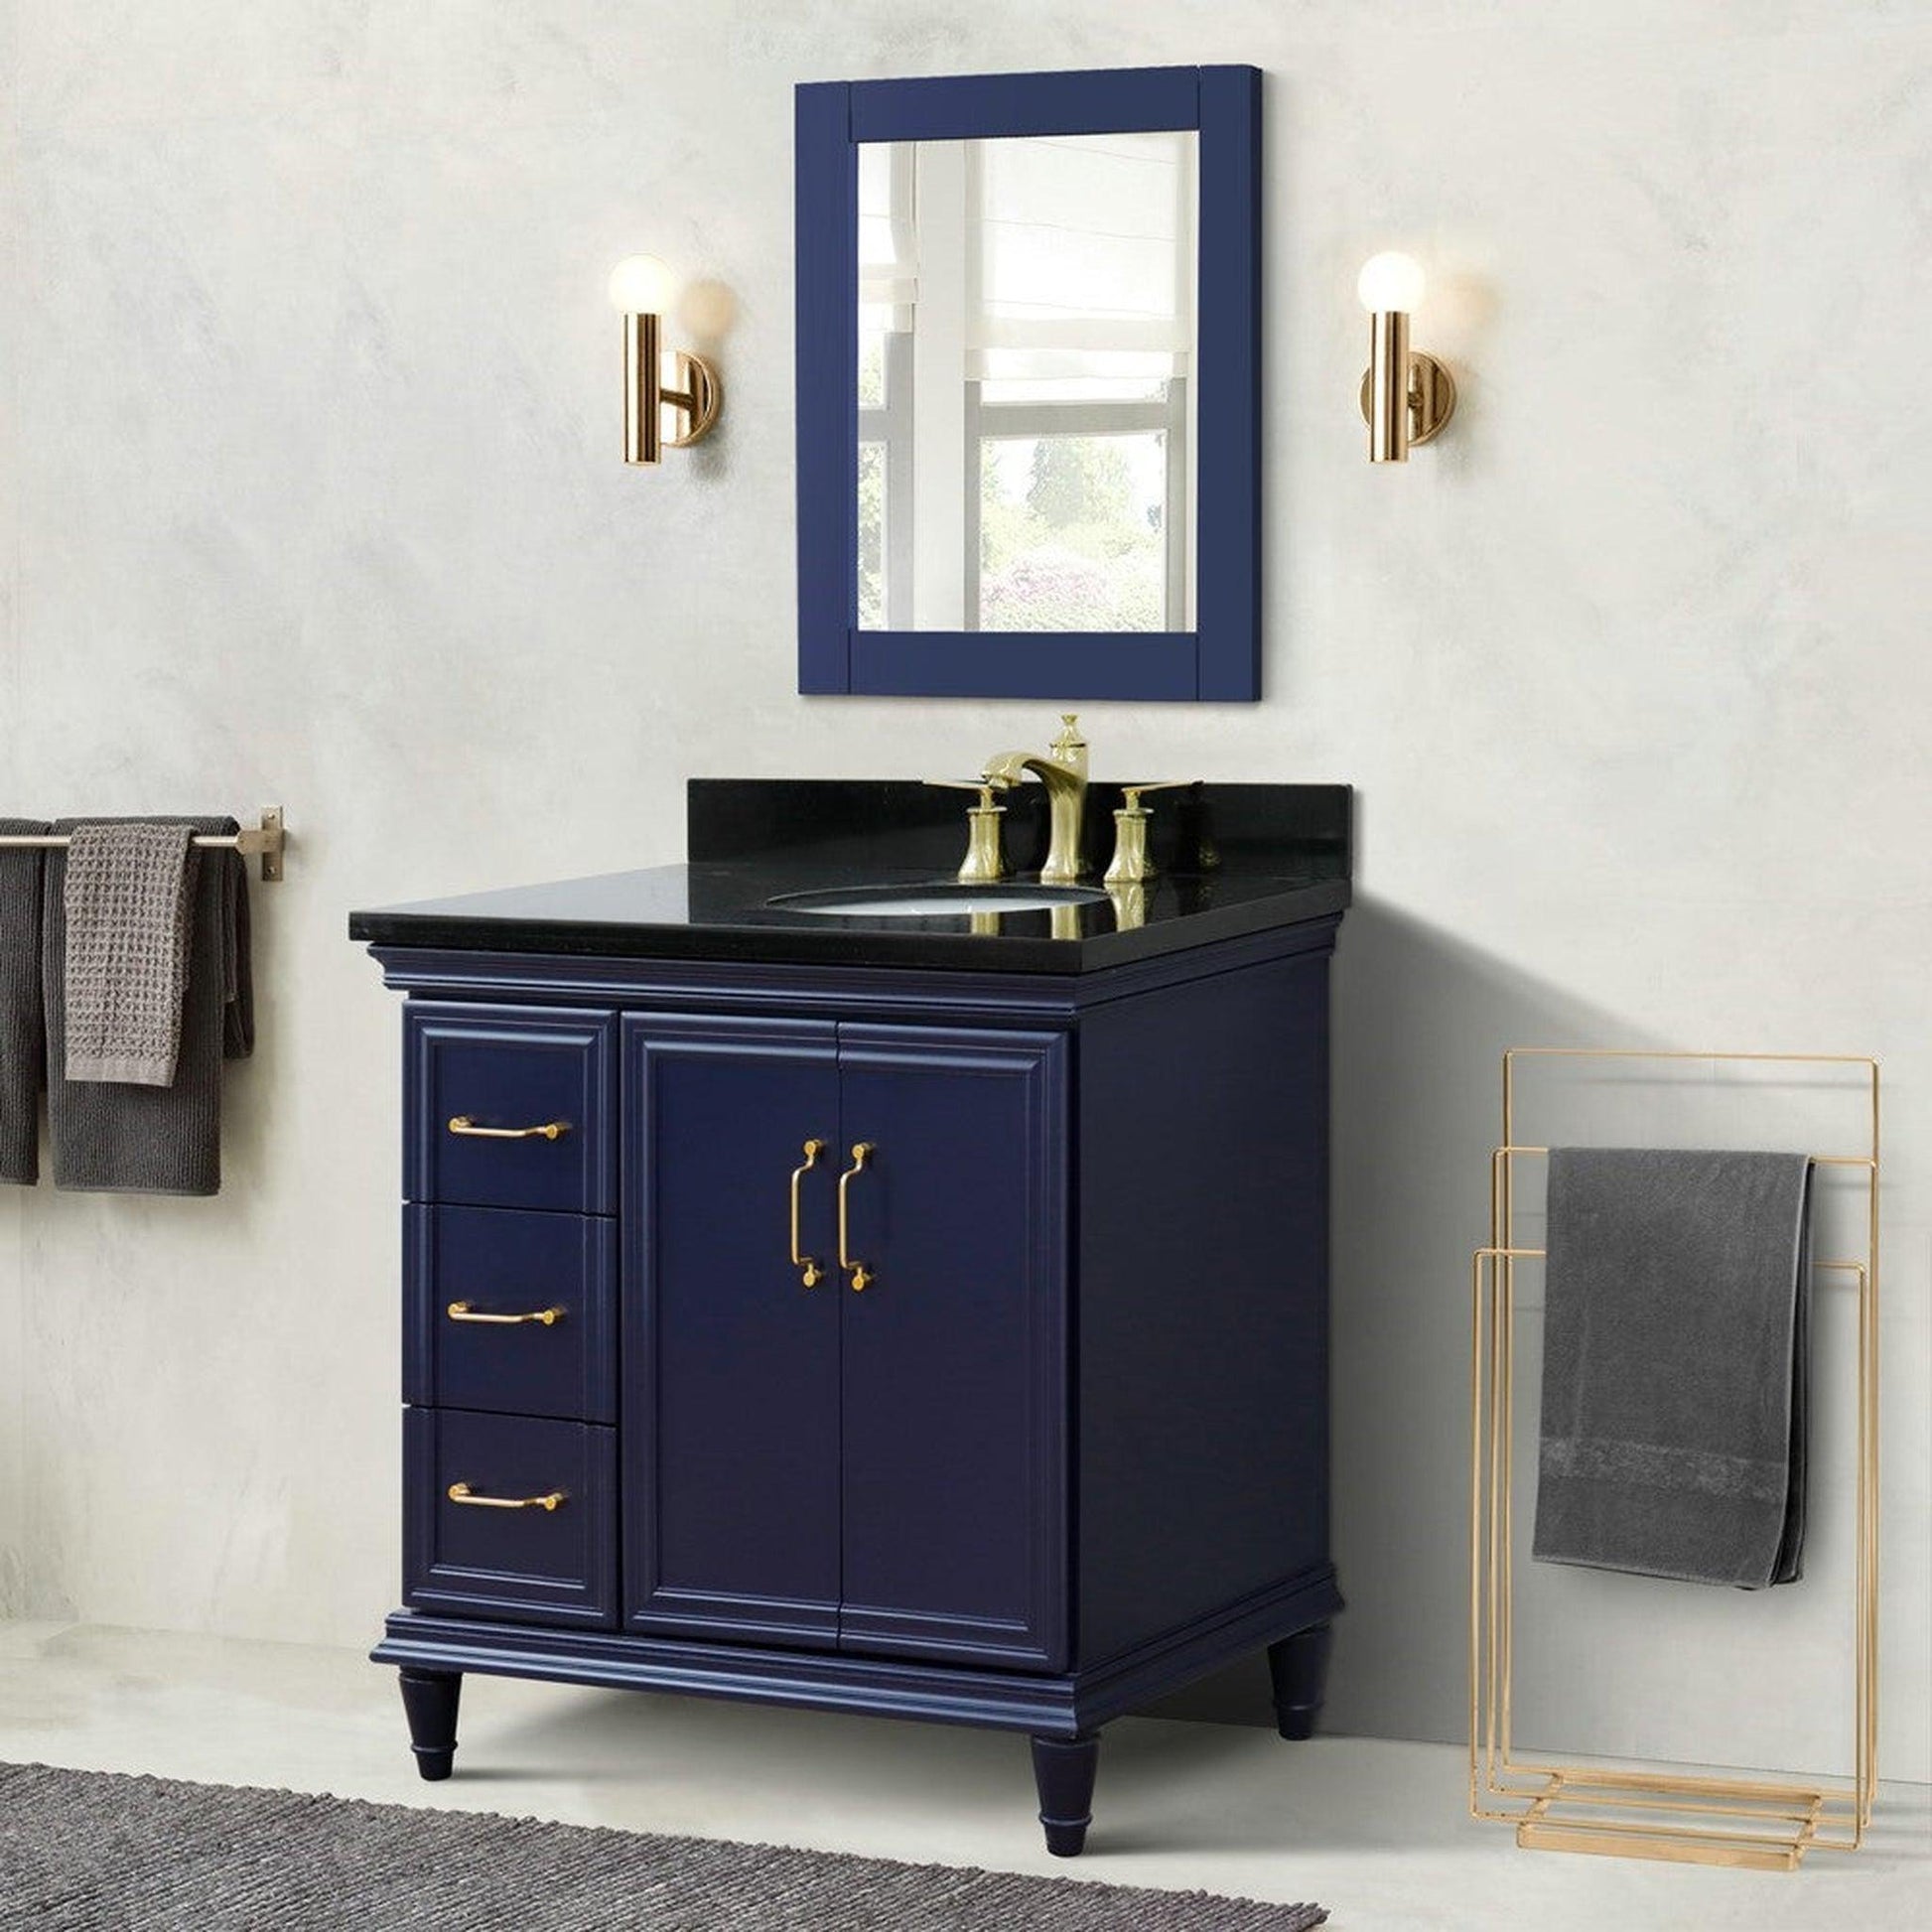 Bellaterra Home Forli 37" 2-Door 3-Drawer Blue Freestanding Vanity Set With Ceramic Right Offset Undermount Oval Sink and Black Galaxy Granite Top, and Right Door Cabinet